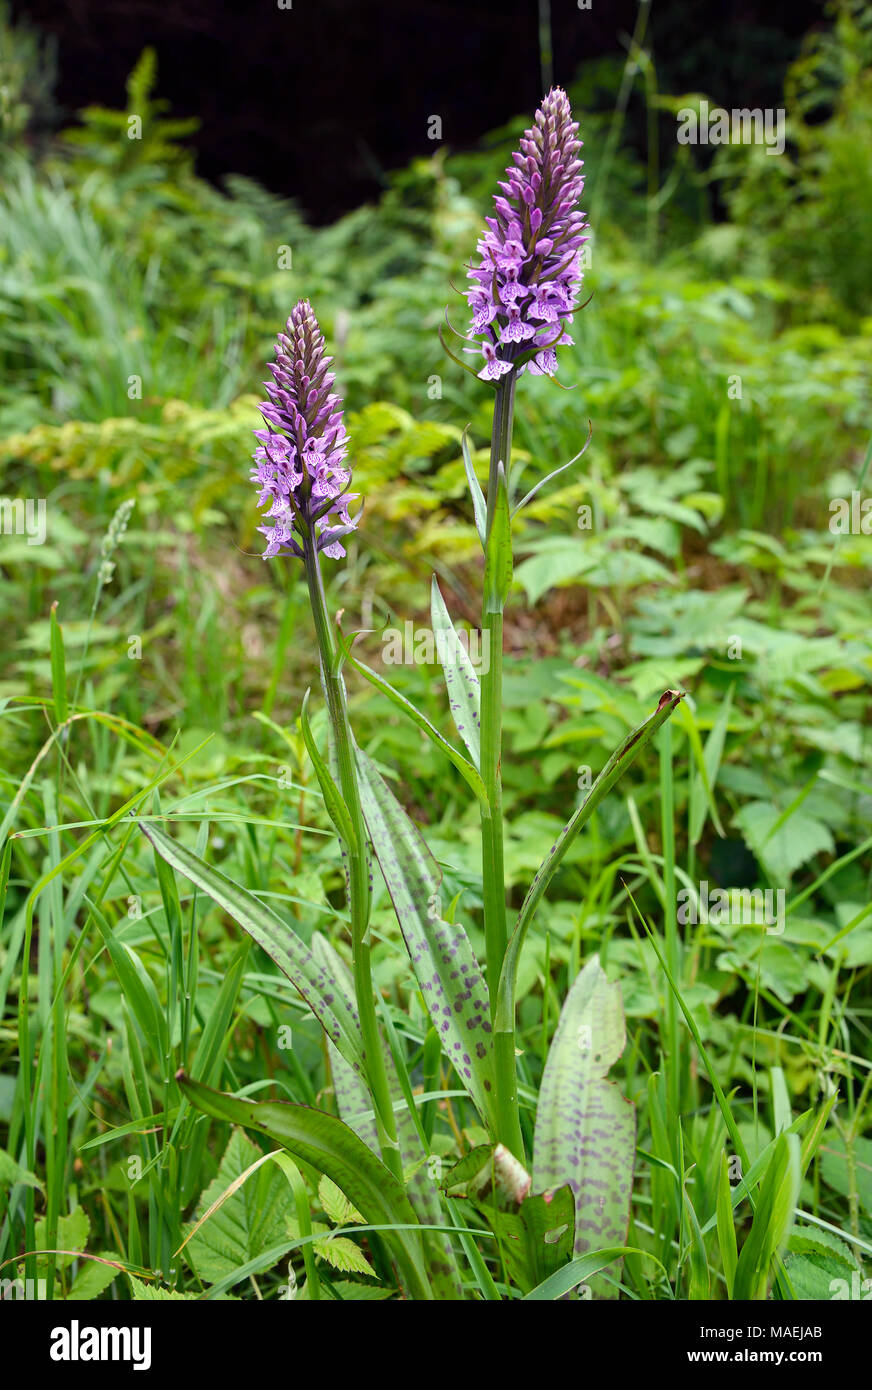 Marsh Orchid Hybrid  Probably cross of Southern Marsh Orchid - Dactylorhiza praetermissa, and Common Spotted Orchid - Dactylorhiza fuchsii Stock Photo